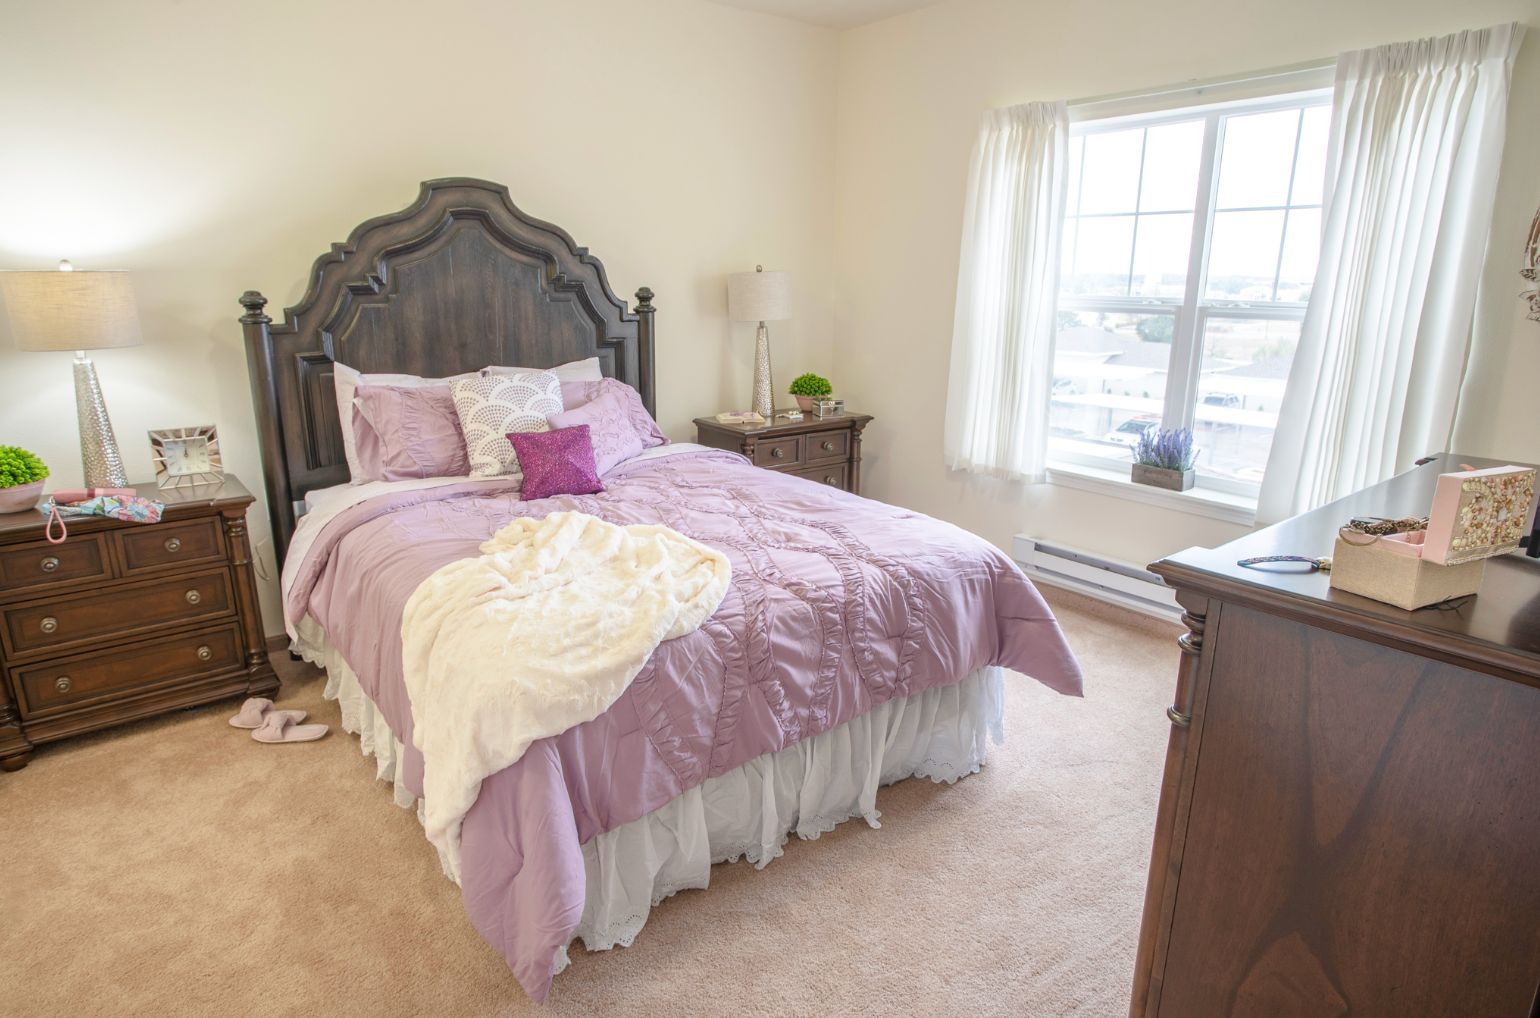 Interior view of a well-furnished bedroom at Maple Ridge Gracious Retirement Living community.